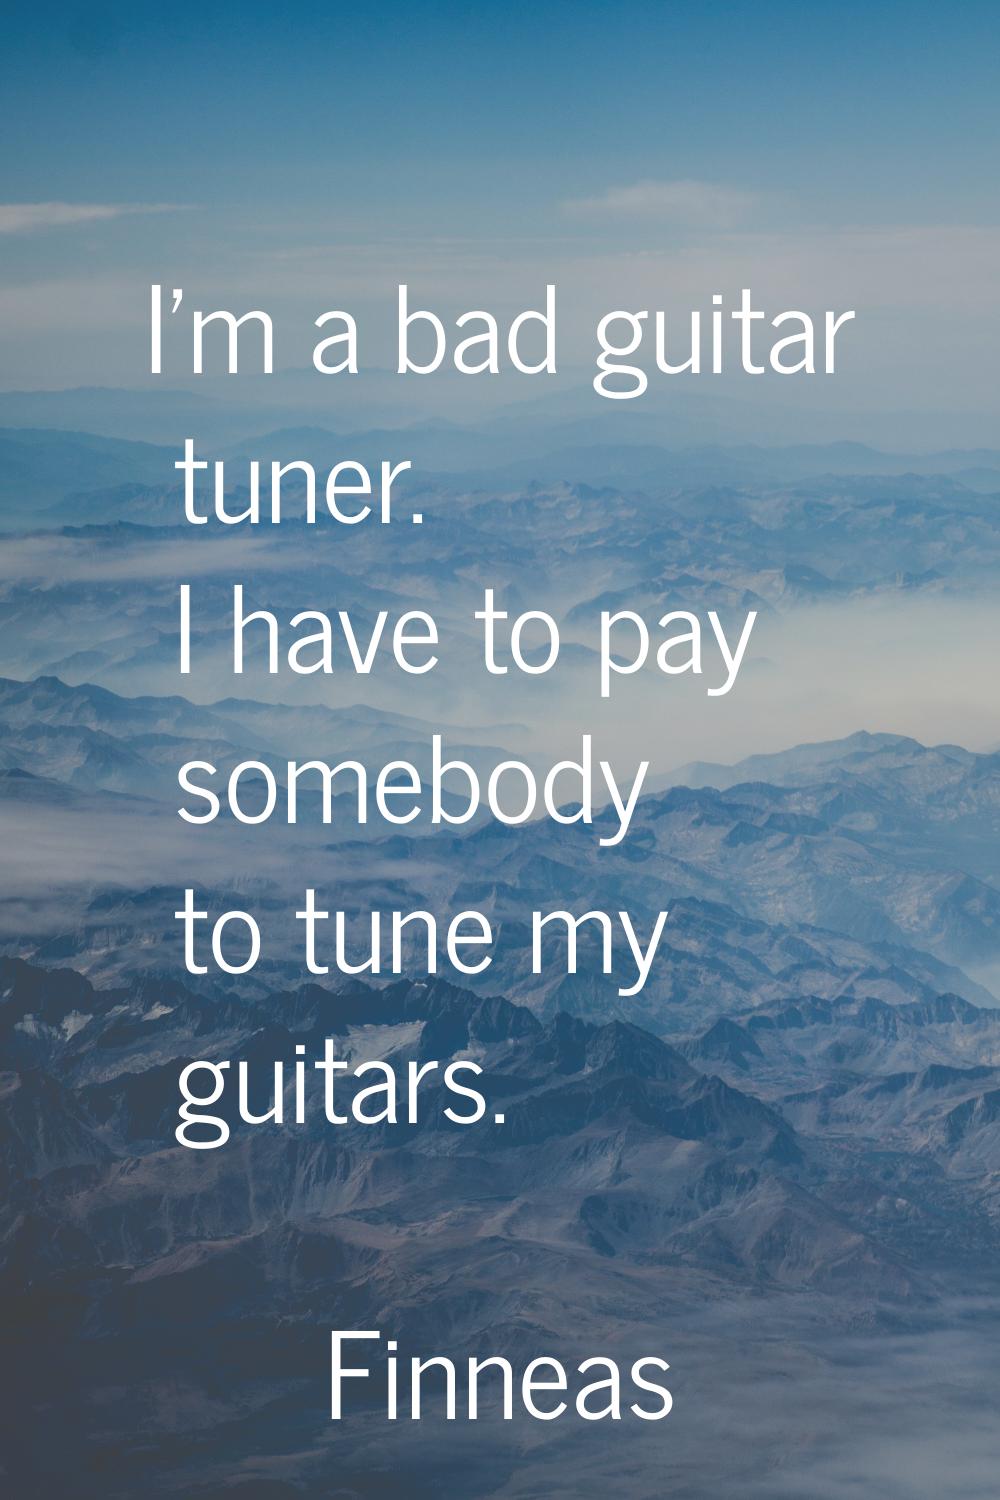 I'm a bad guitar tuner. I have to pay somebody to tune my guitars.